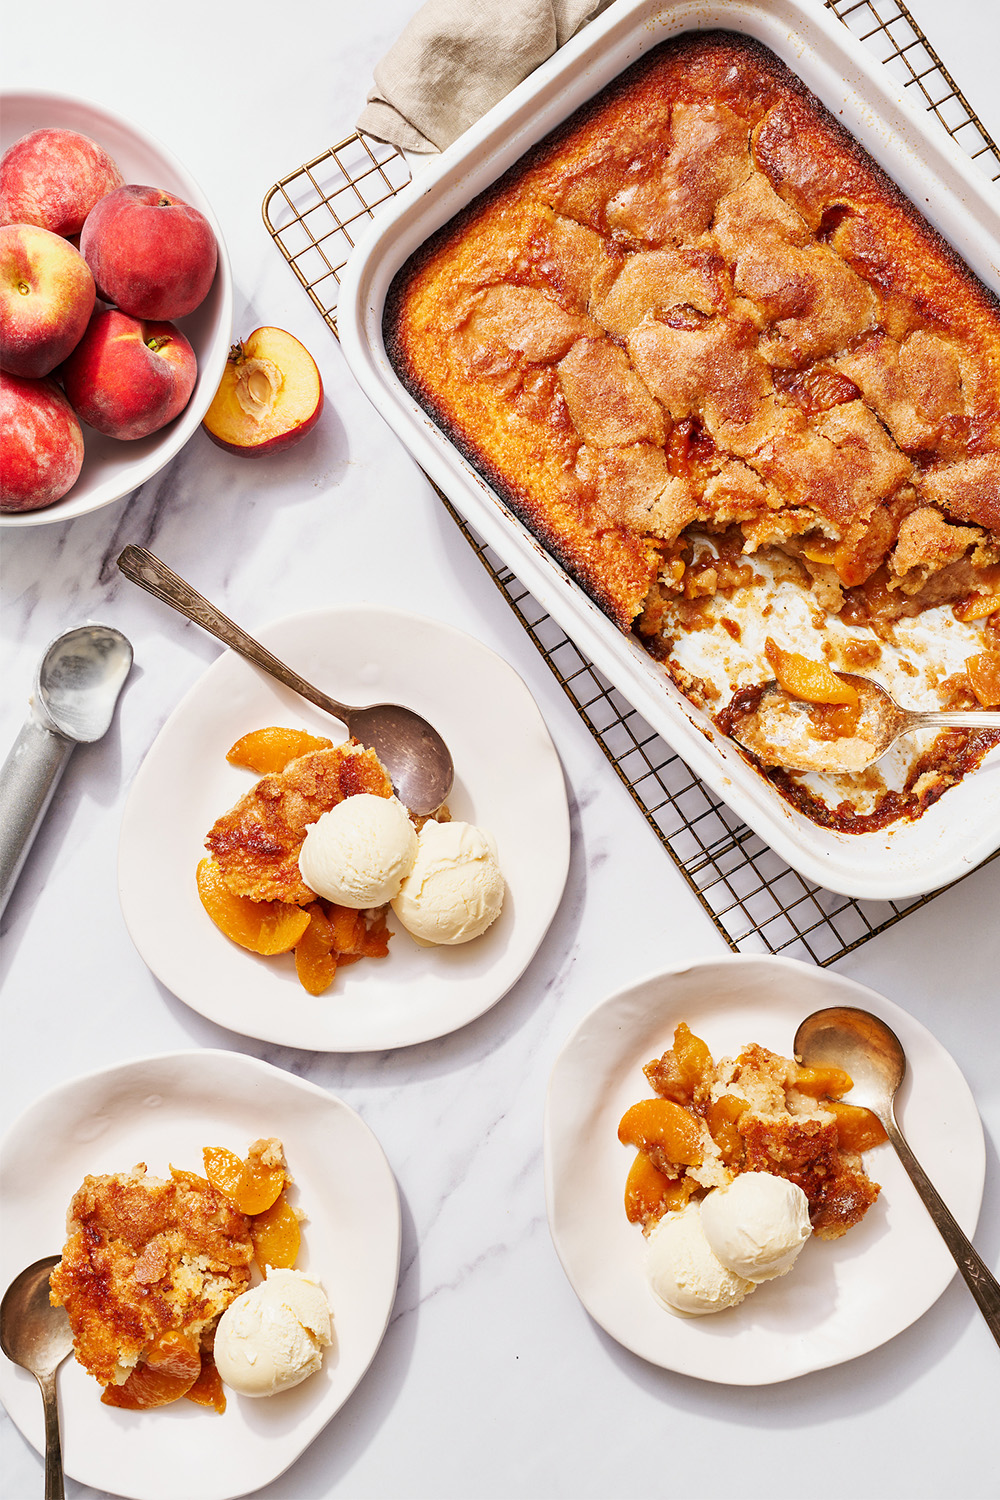 peach cobbler being served from a dish onto individual plates, topped with vanilla ice cream